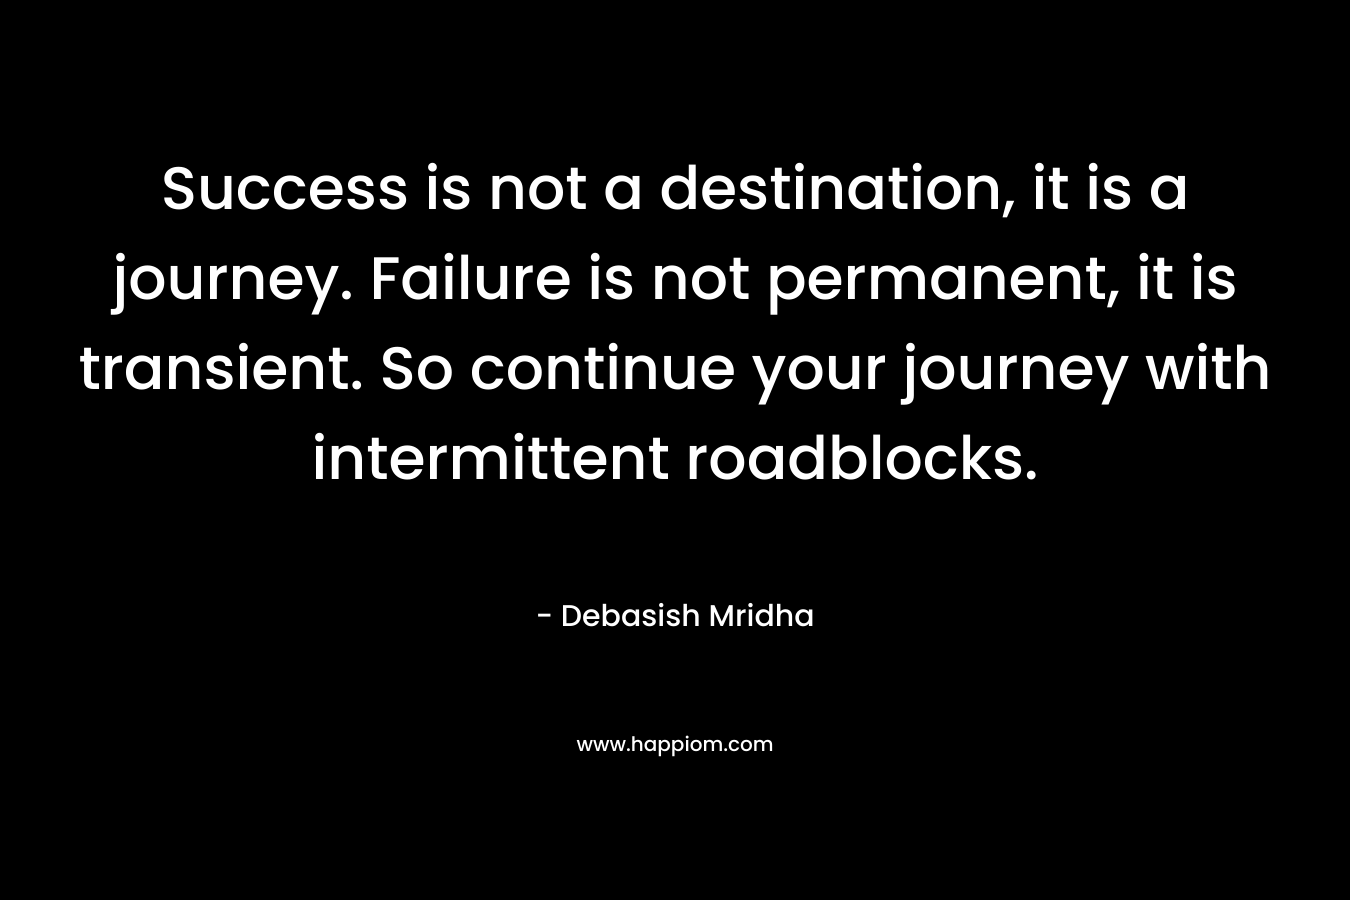 Success is not a destination, it is a journey. Failure is not permanent, it is transient. So continue your journey with intermittent roadblocks. – Debasish Mridha